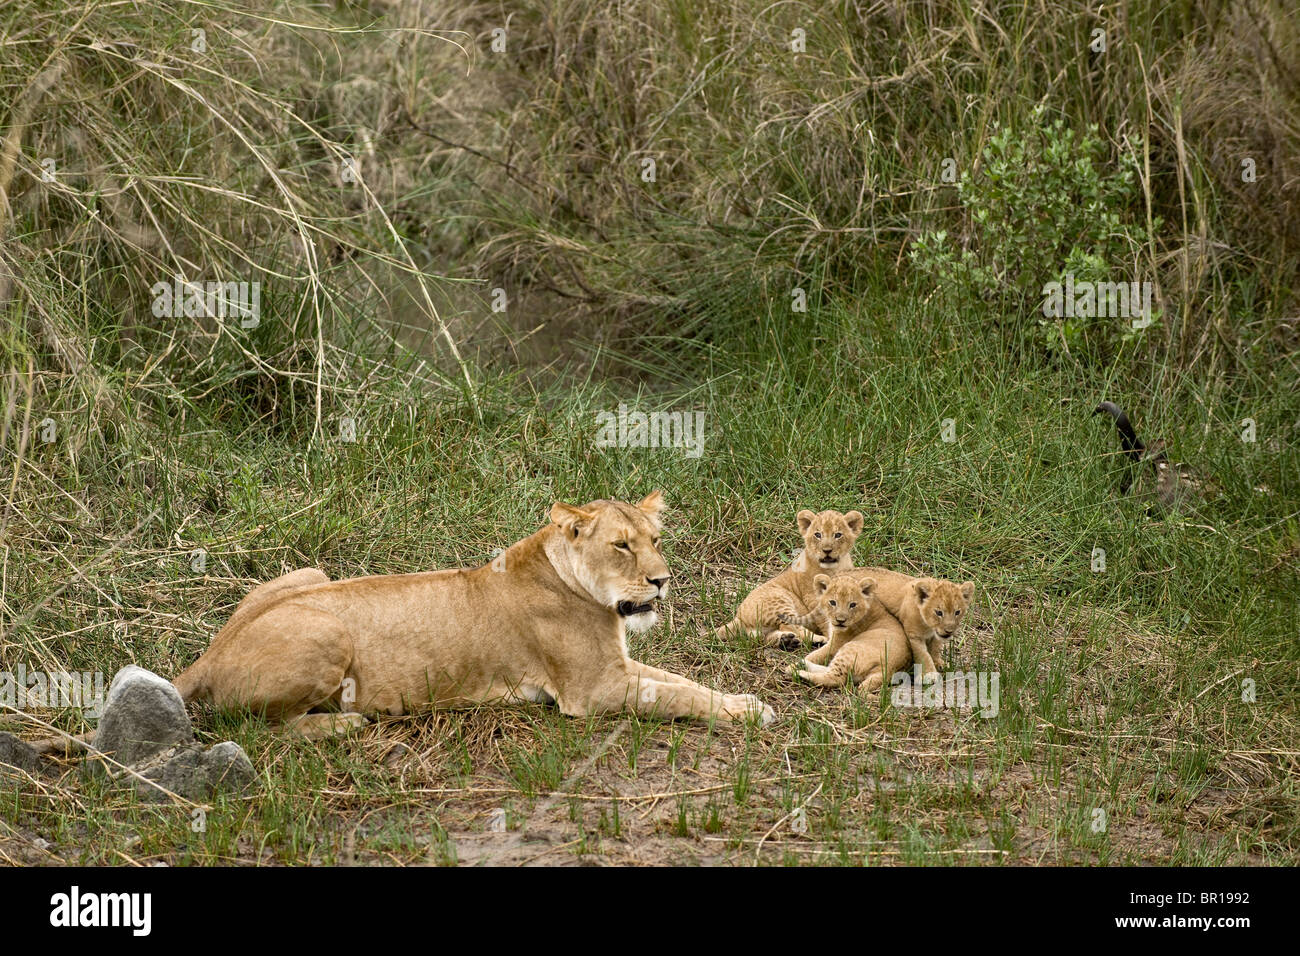 Lioness and her cubs in Serengeti, Tanzania, Africa Stock Photo